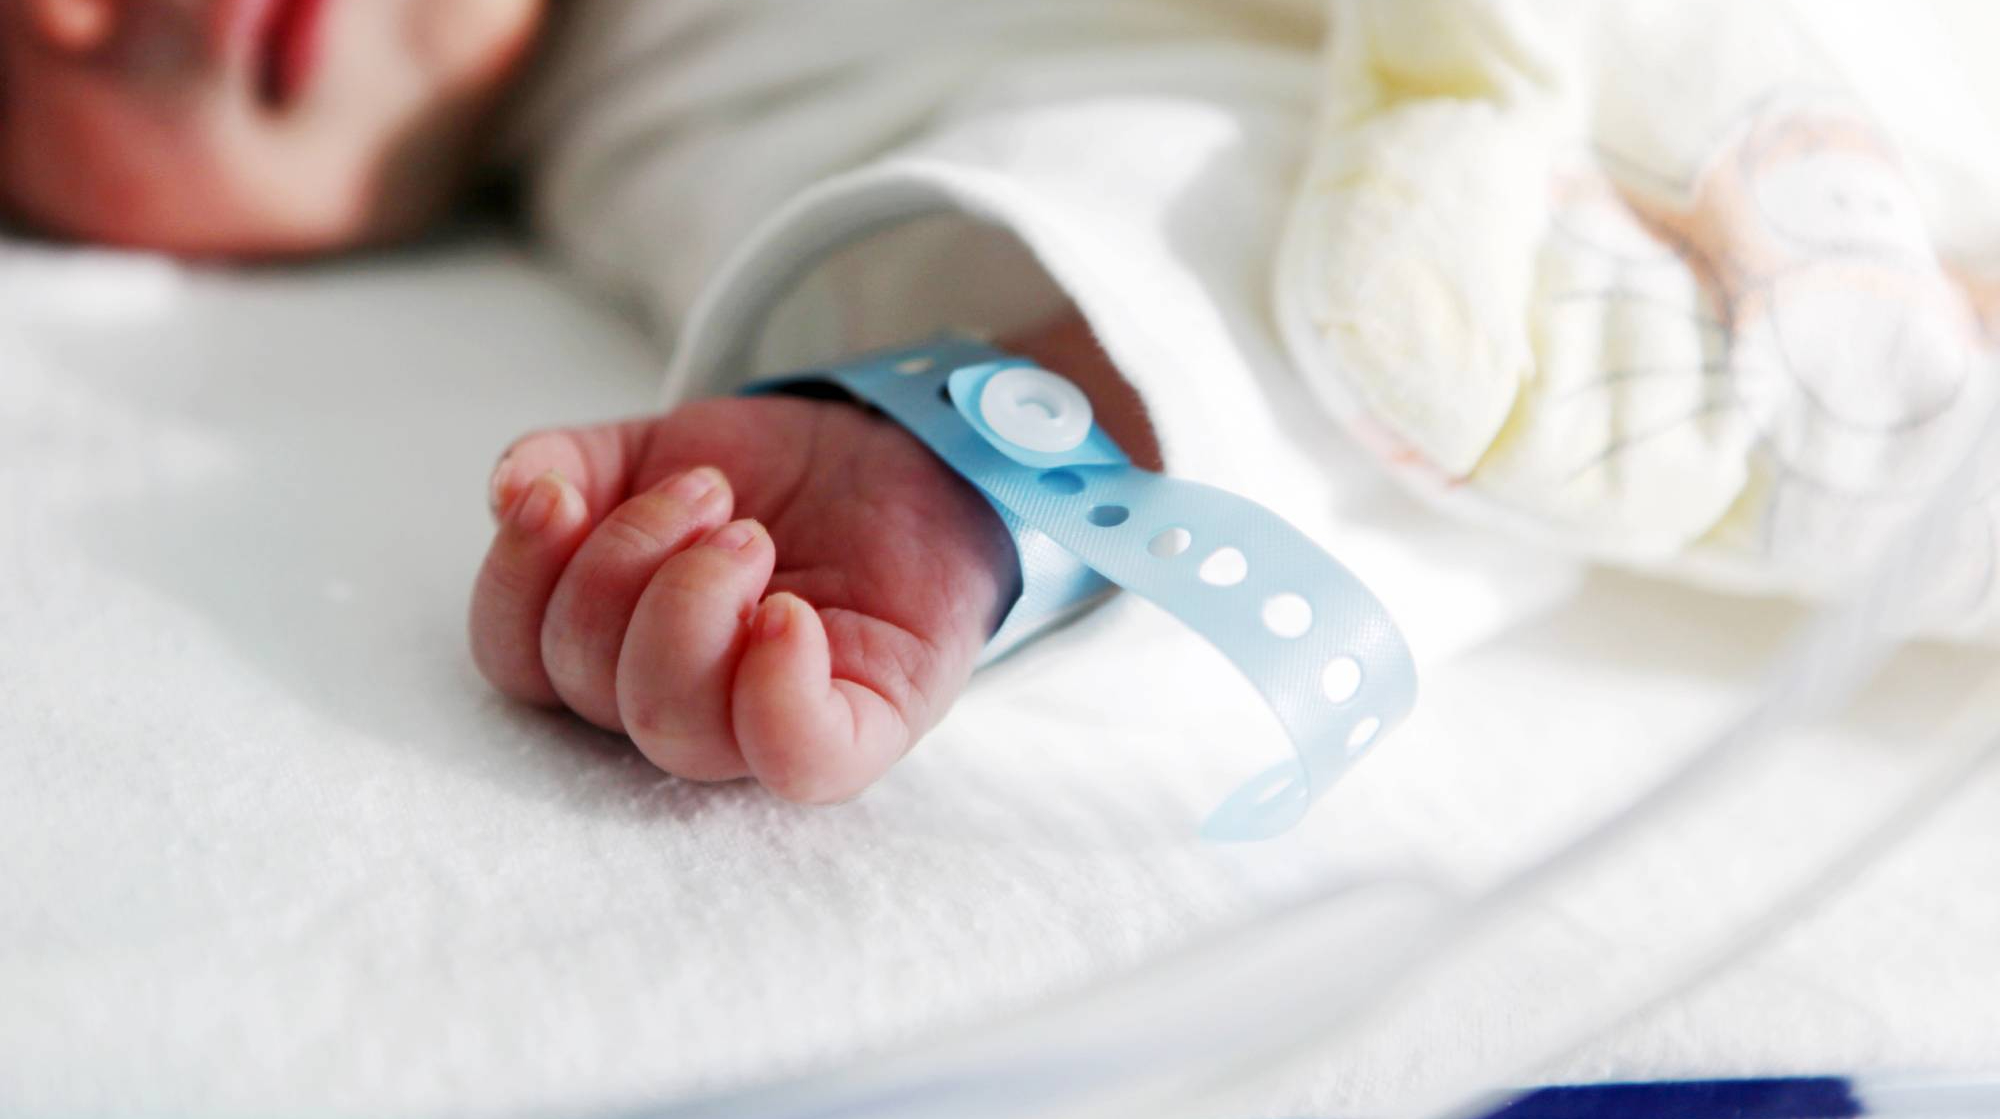 In the Rivne region, a child fell into a coma immediately after birth and died: the parents blame the doctors